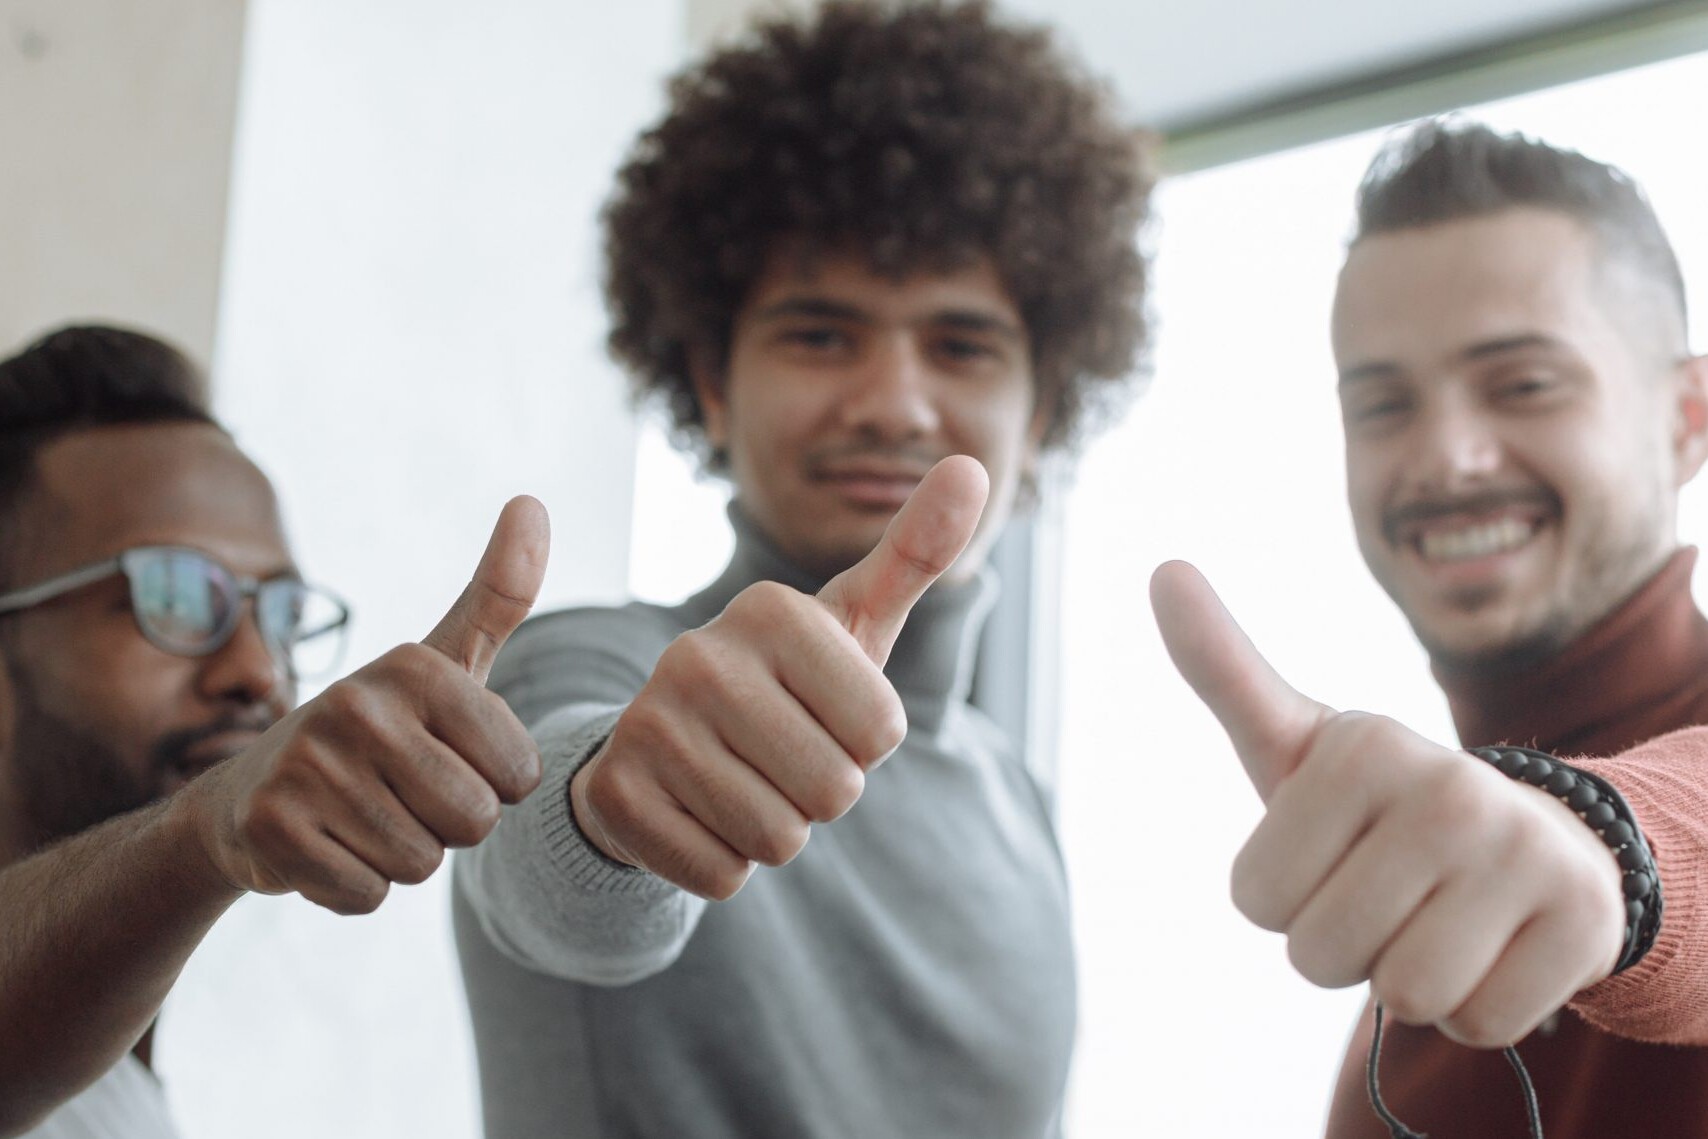 3 men giving a thumbs up for successful qualitative research